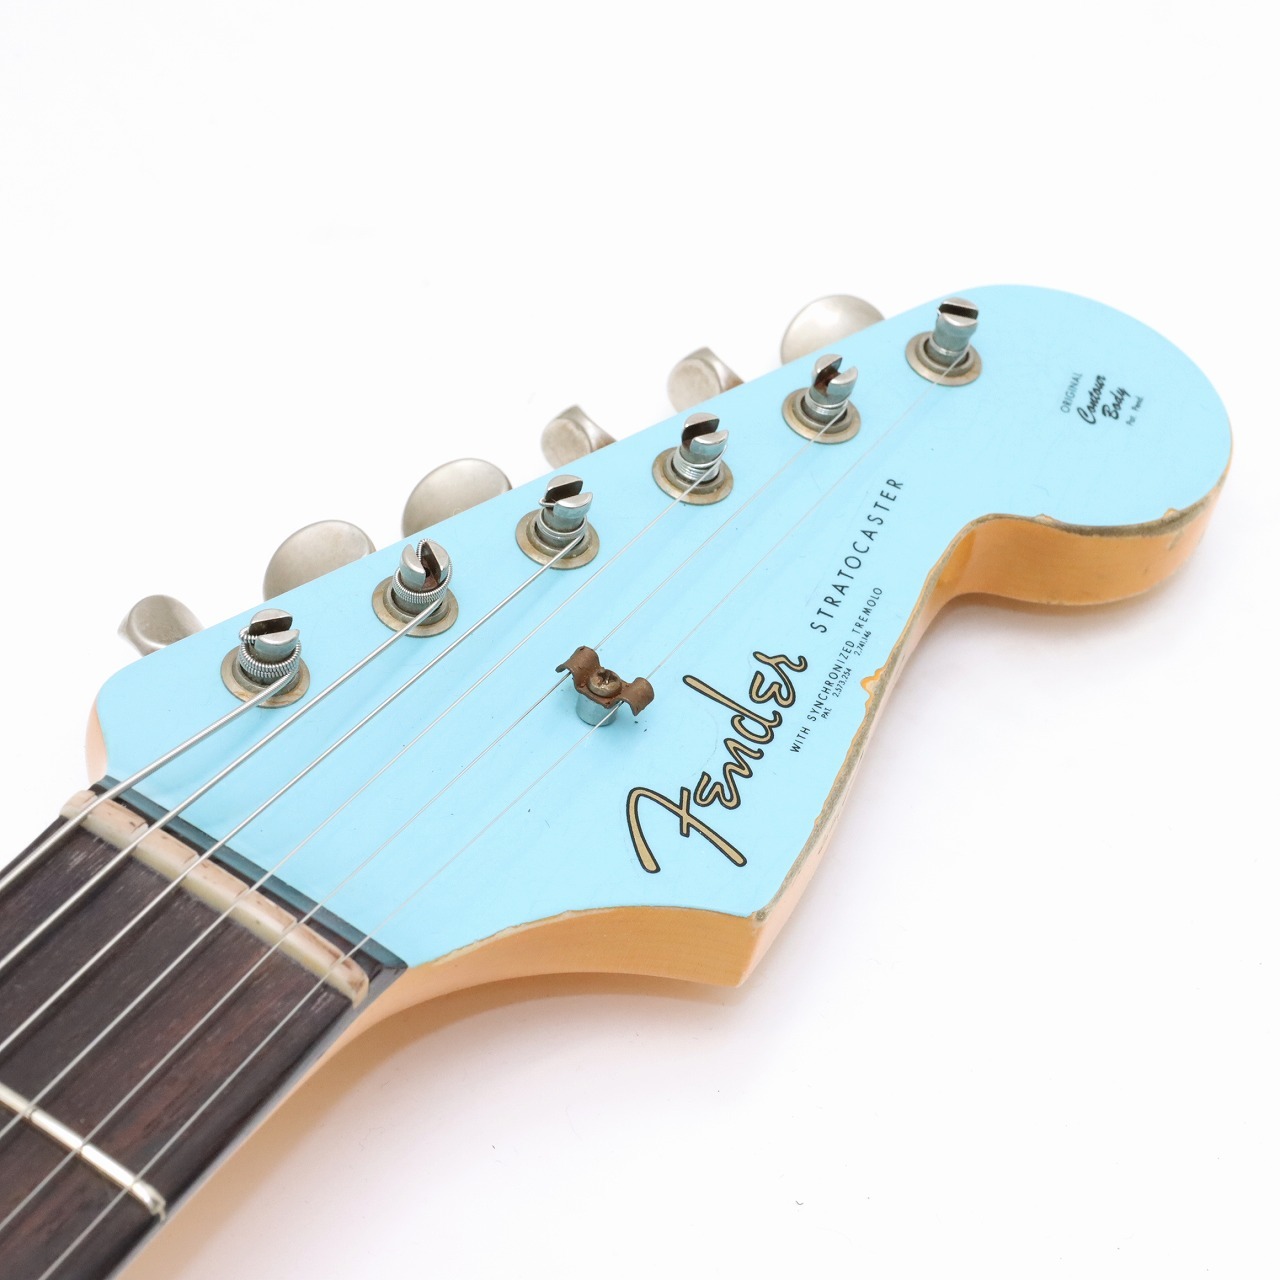 Fender Custom Shop Yamano Limited 1962 Stratocaster Heavy Relic Matching Headstock / Daphne Blue